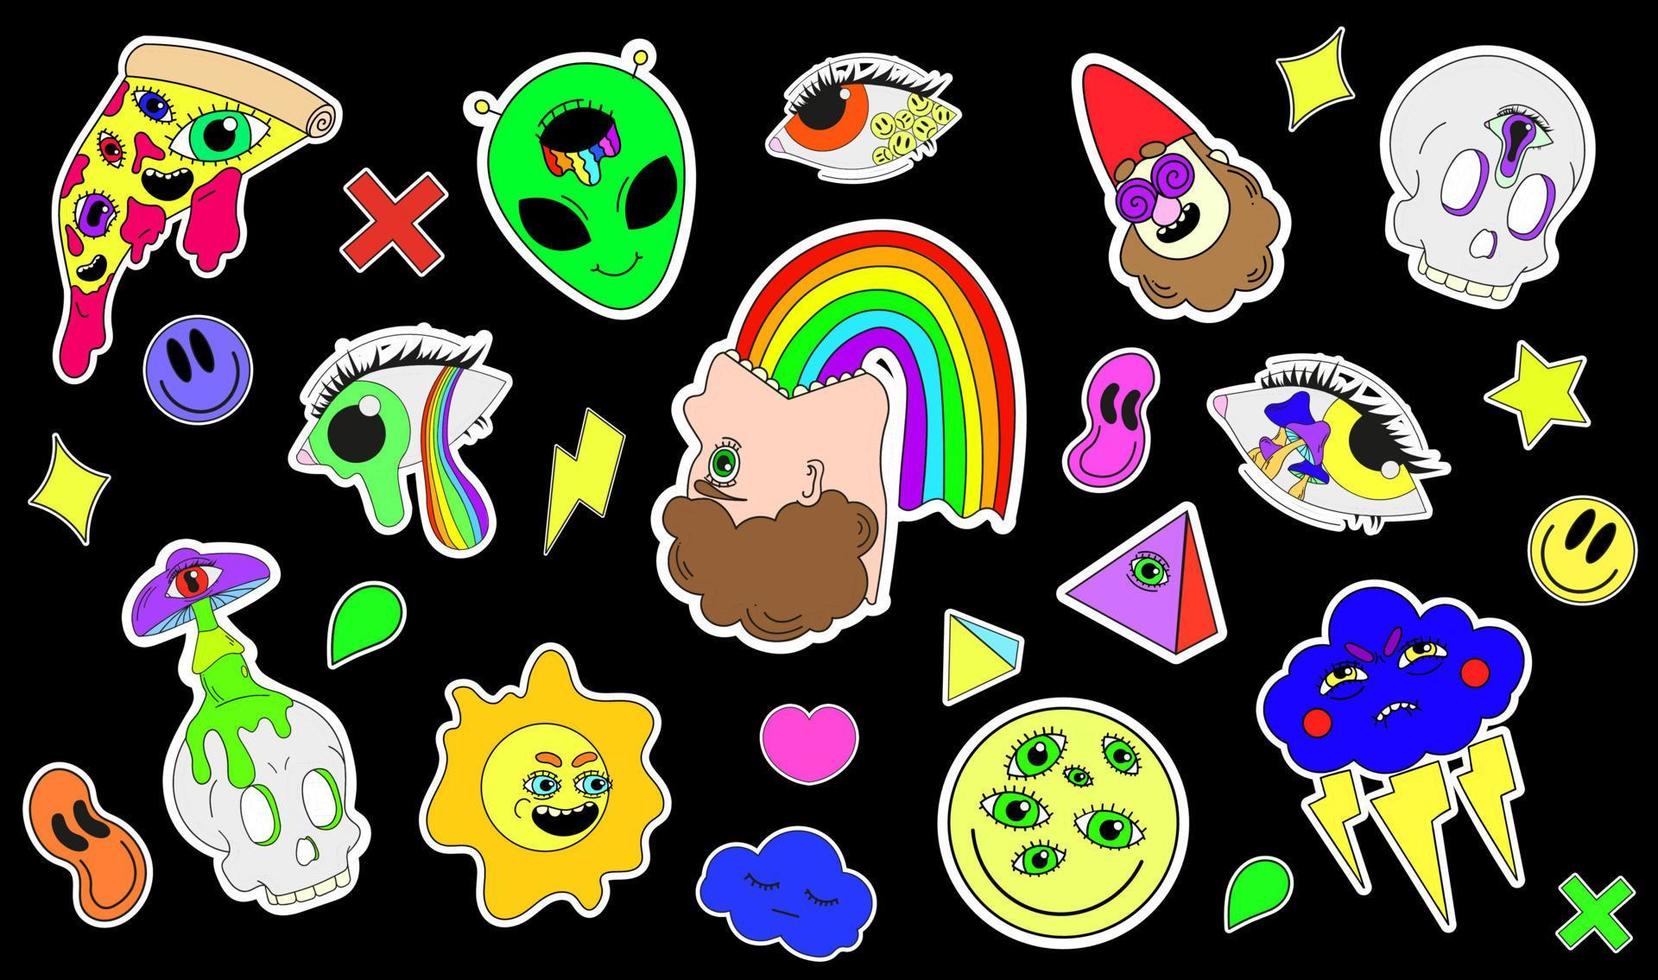 A set of psychedelic stickers, a rainbow, an illustration of a man vomiting a rainbow, an alien, a pizza with eyes. Surrealism. vector